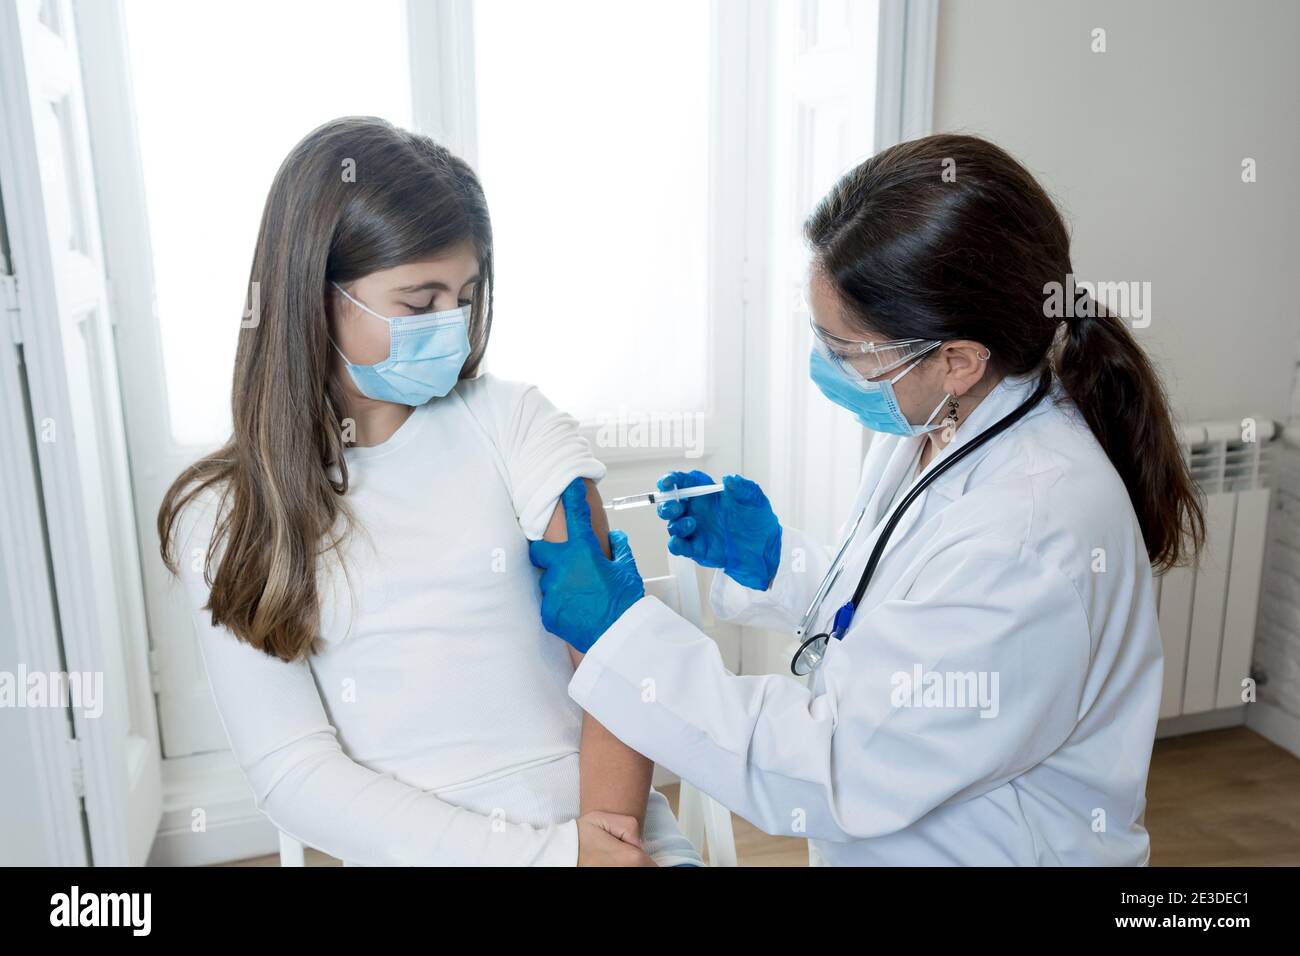 Nurse administering the coronavirus vaccine to a a young girl patient with face mask in Doctors clinic. Immunization, medical treatment and Covid-19 v Stock Photo